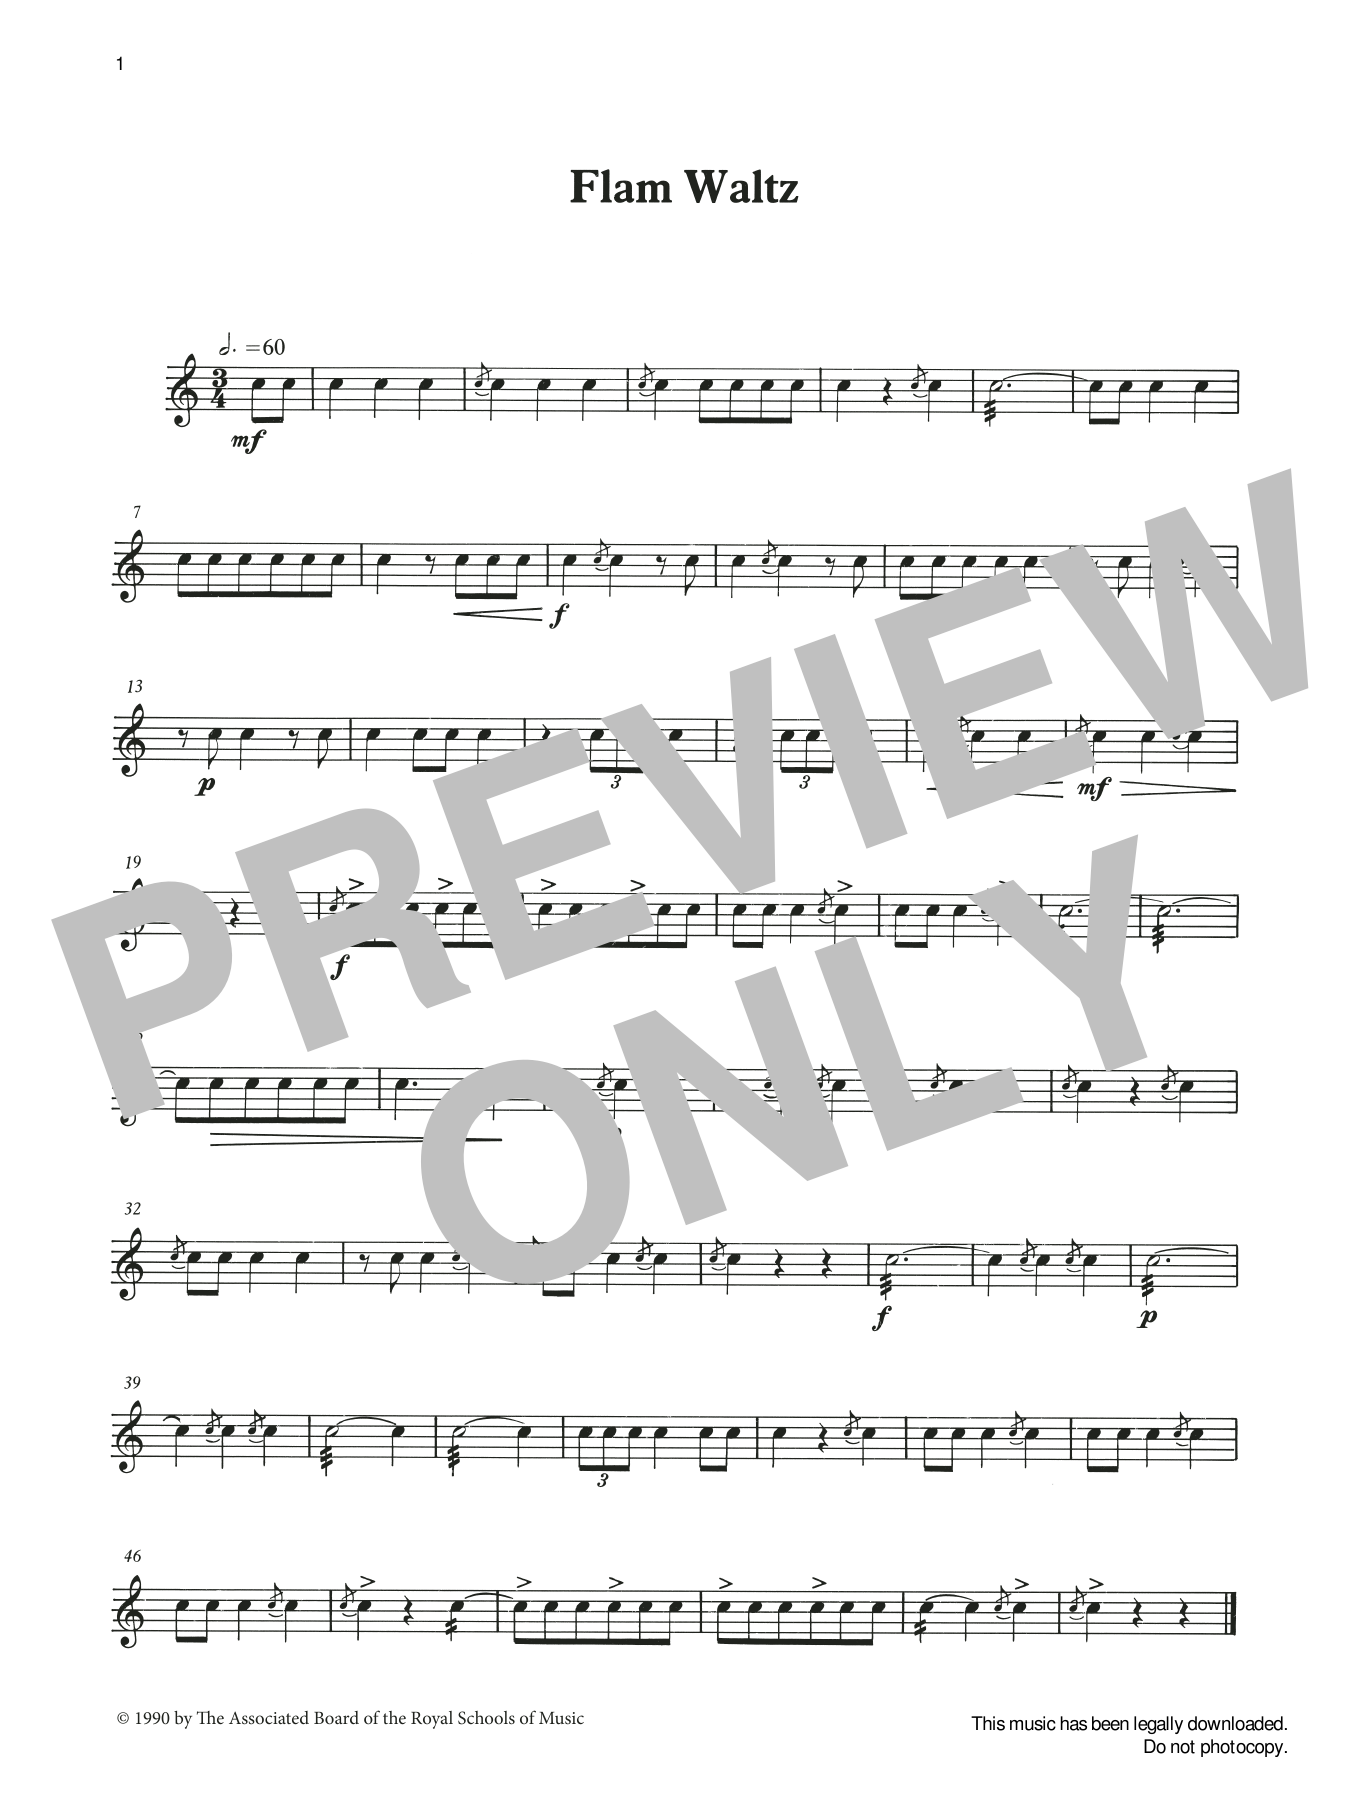 Download Ian Wright and Kevin Hathaway Flam Waltz from Graded Music for Snare Sheet Music